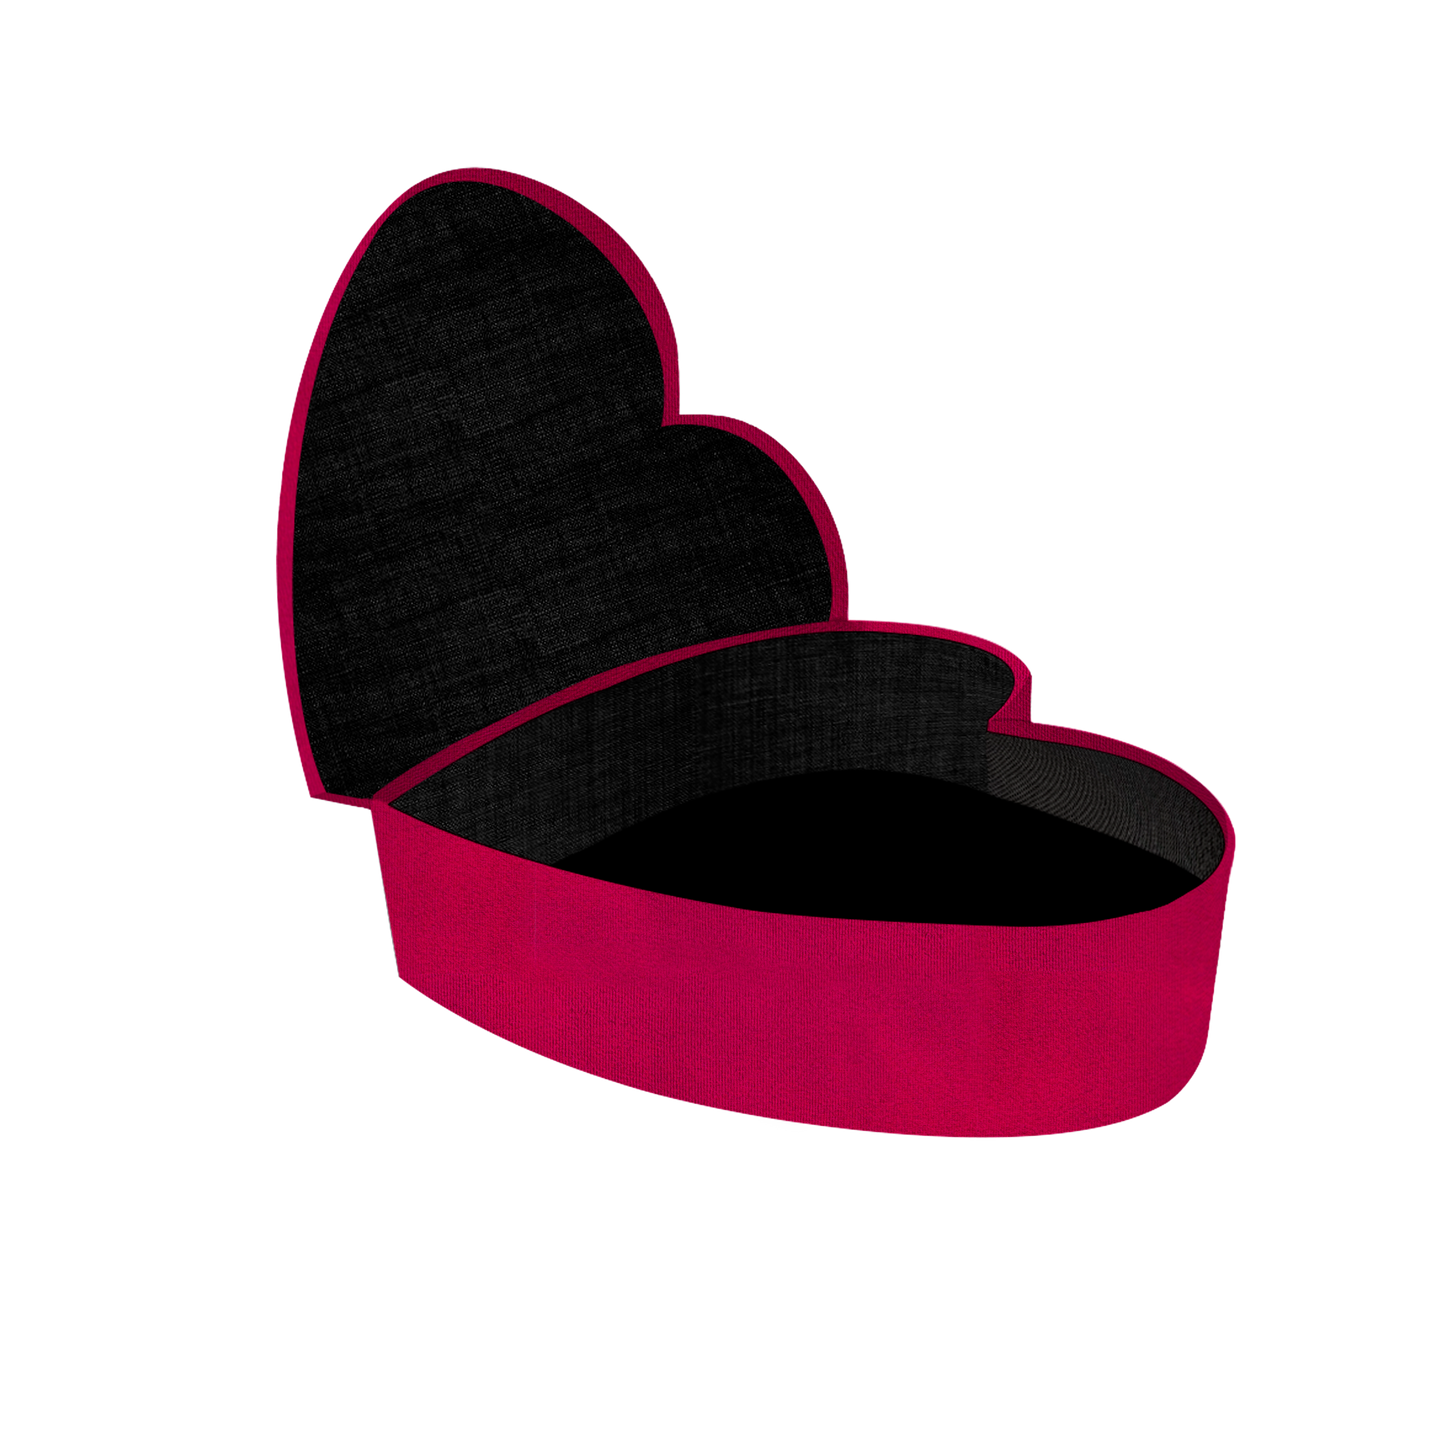 Kit 3 different sizes heart shape boxes 3 in 1 - Suede Fucsia